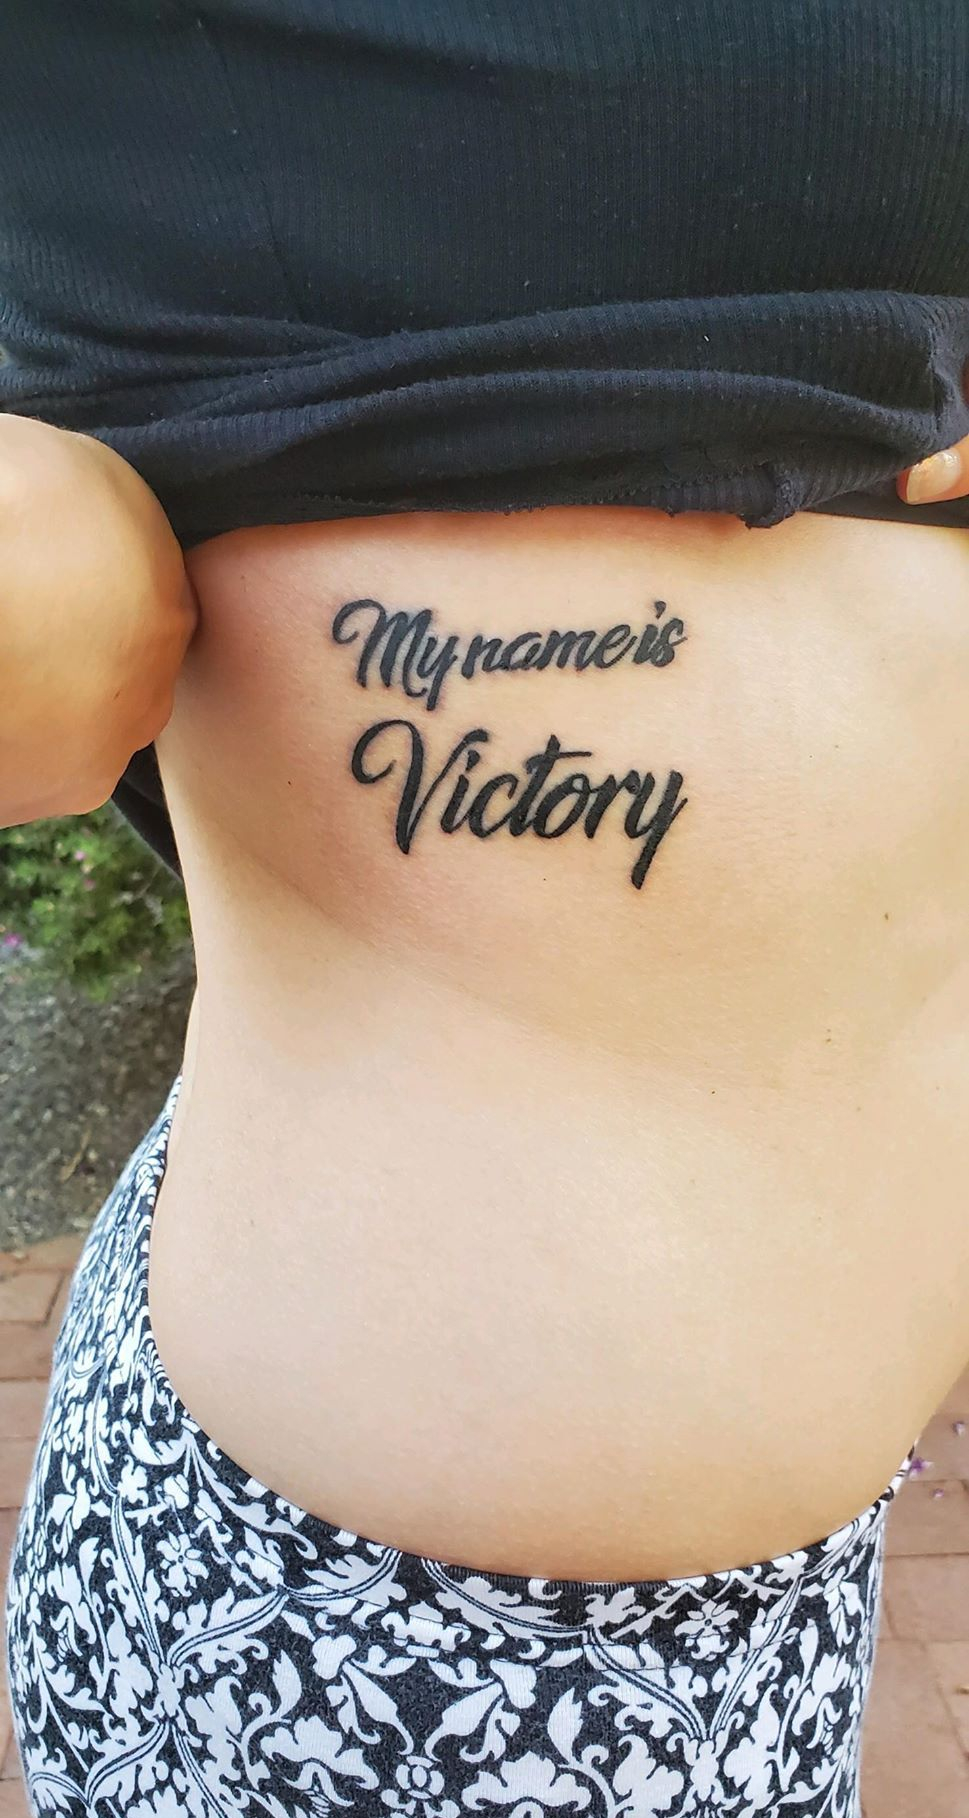 My Name Is Victory tattoo